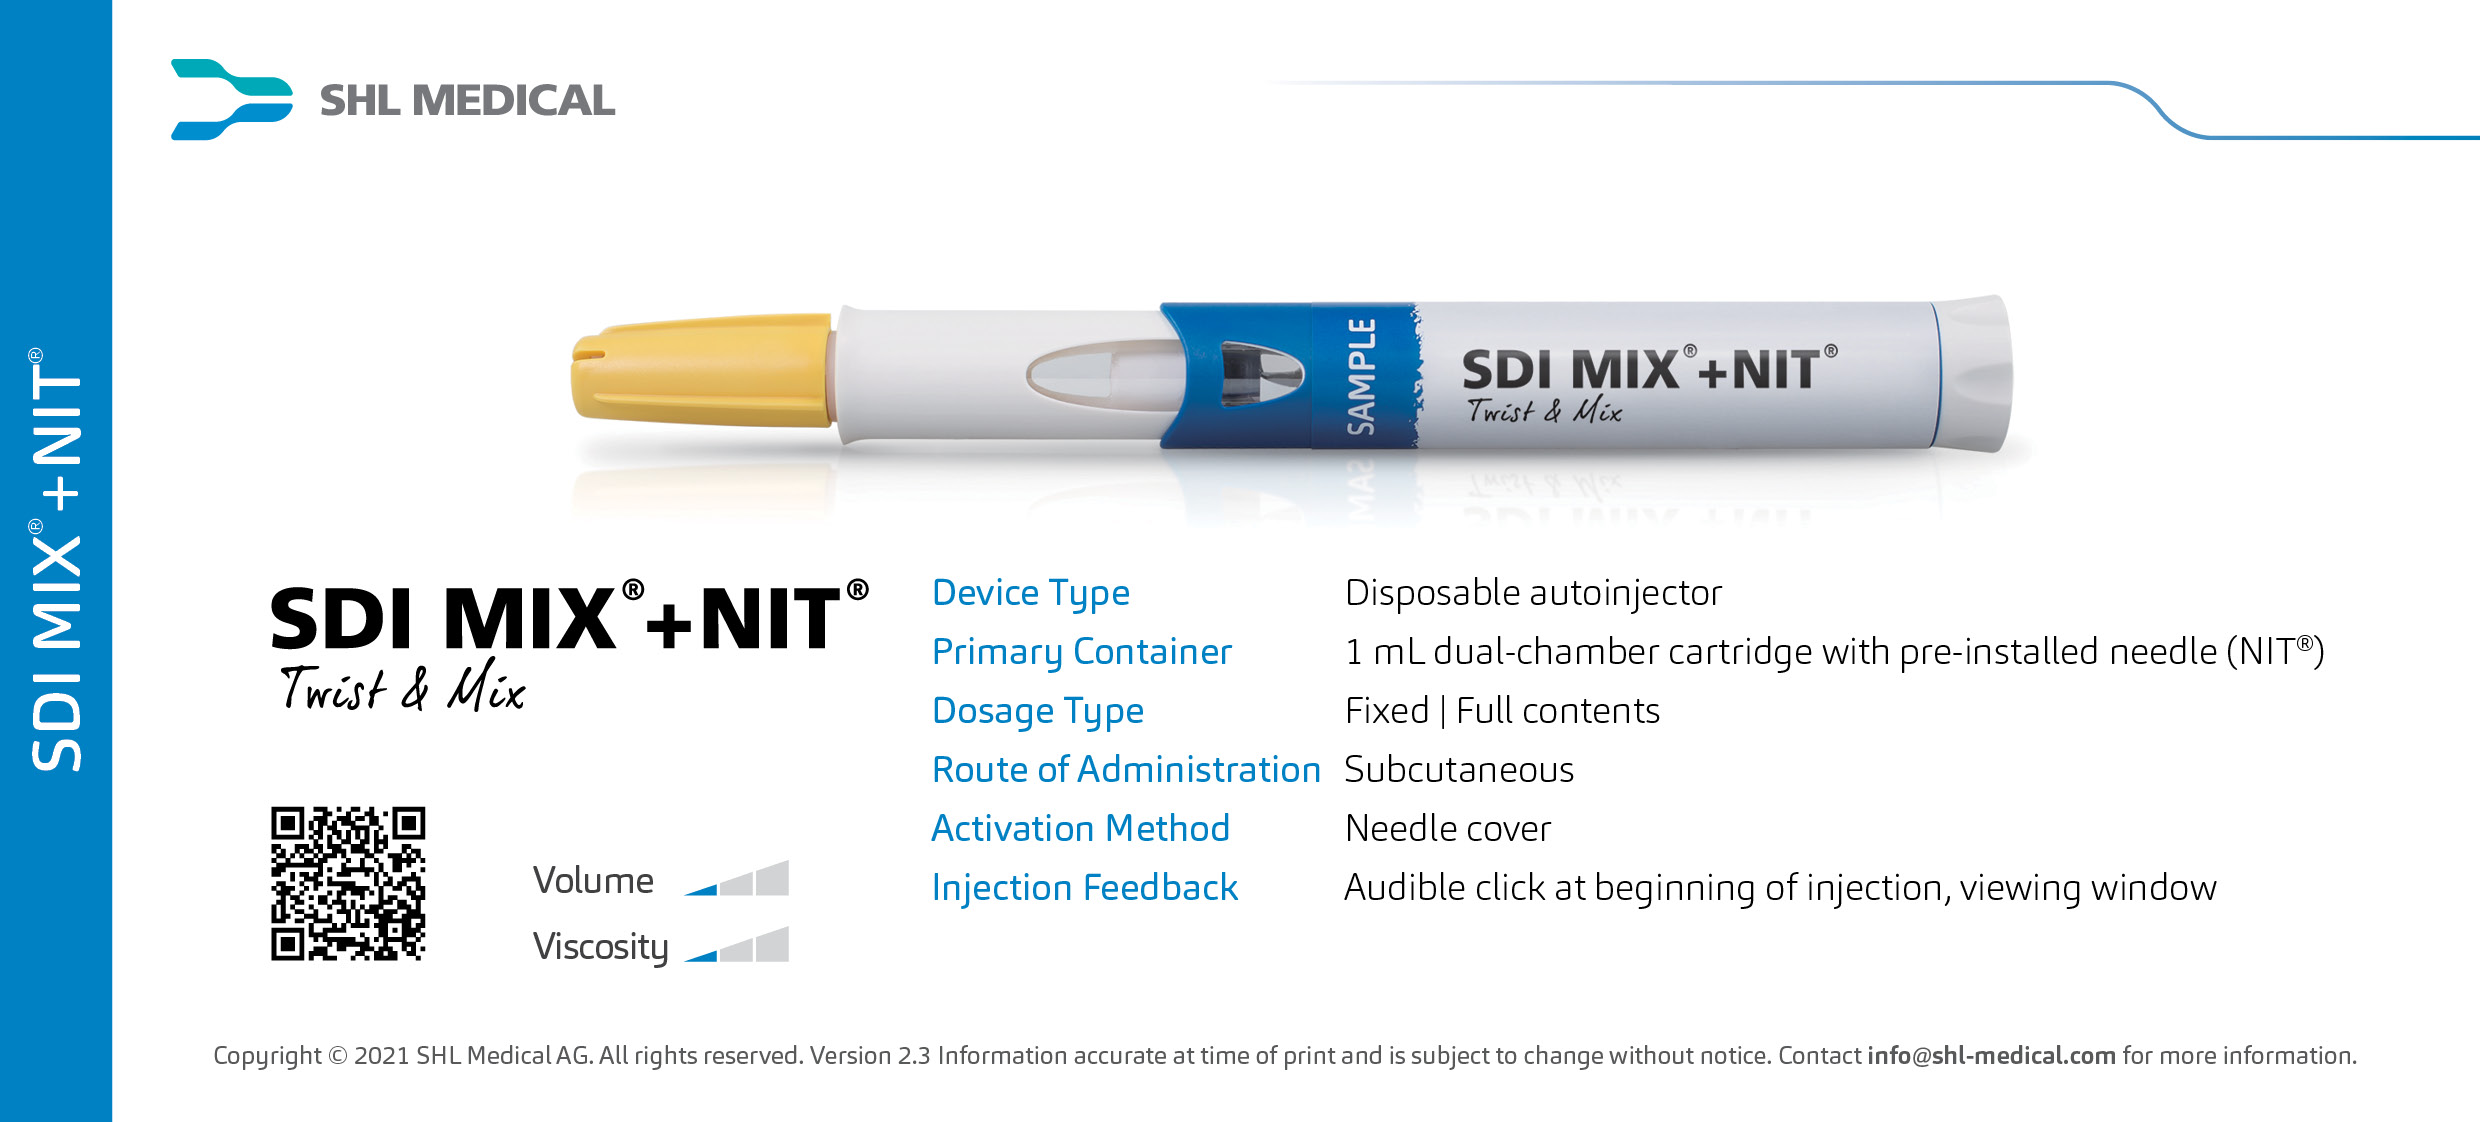 Product card of SDI Mix® + NIT® dual chamber, cartridge autoinjector with pre-installed needle isolation technology (NIT) developed by SHL Medical featuring its device specifications and handling instructions